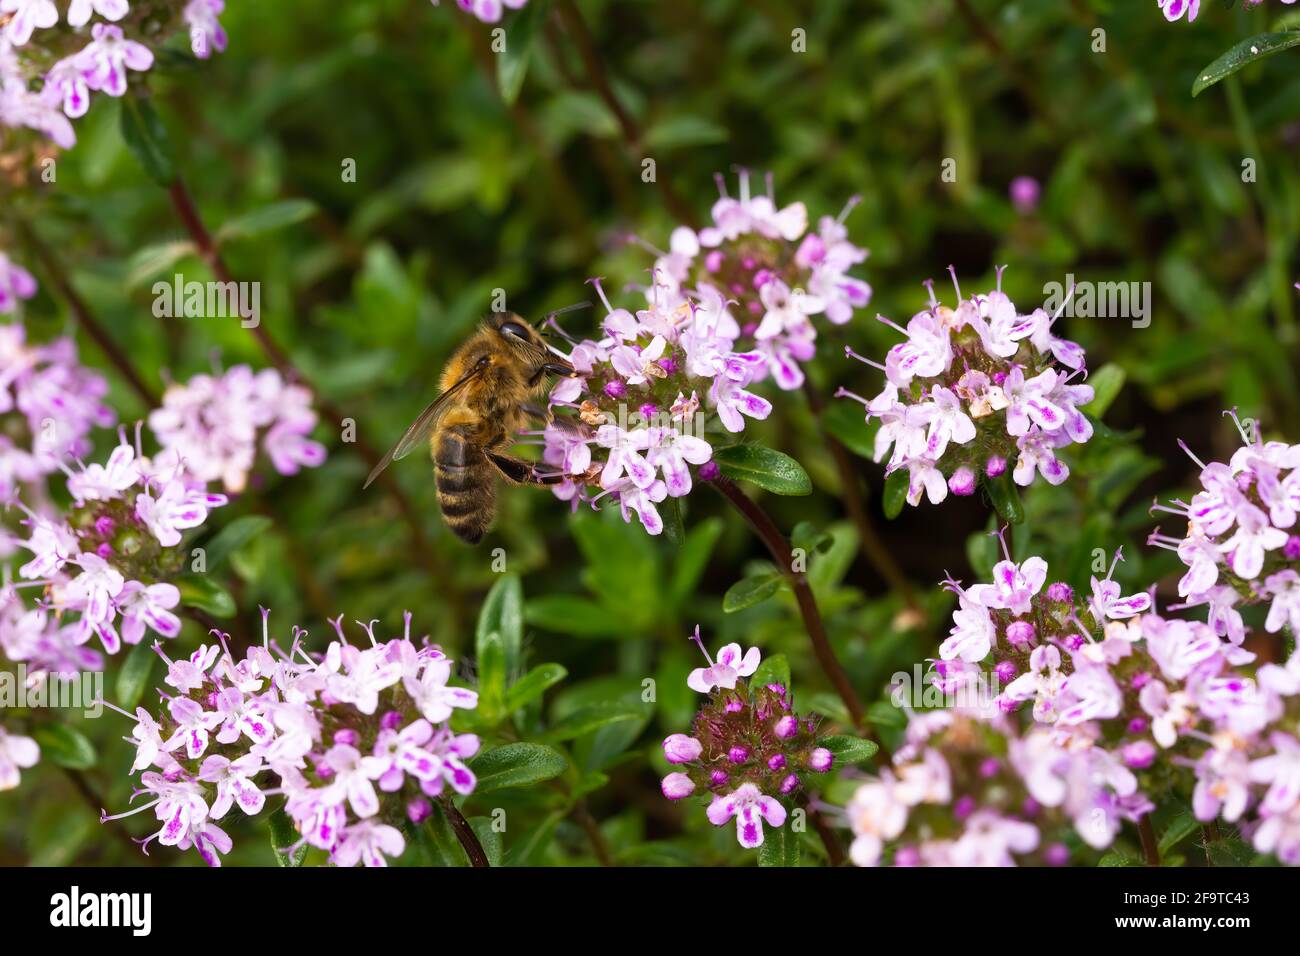 Macrophotography, Bee on a flower of caraway thyme (Thymus Herba Barona) on a sunny day. Stock Photo